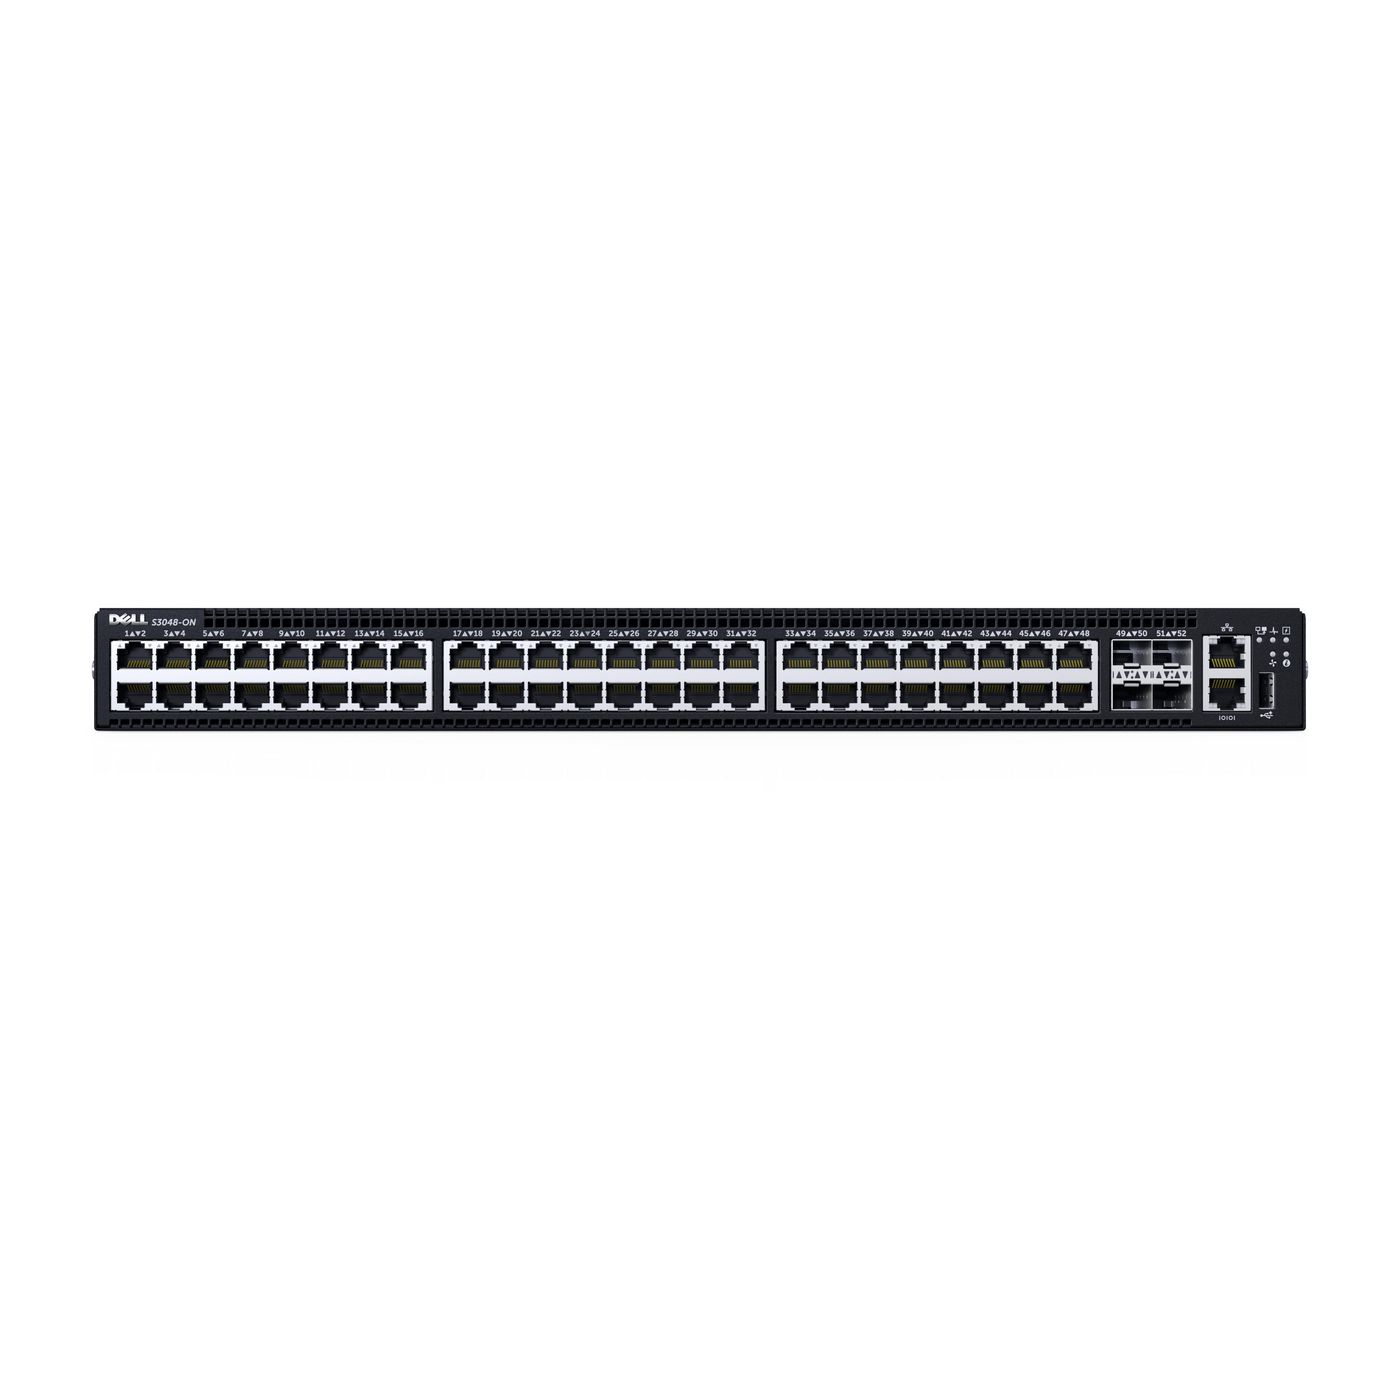 Networking S3048-on 48x 4xsfp+10gbe Ports Stacking Io To Psu